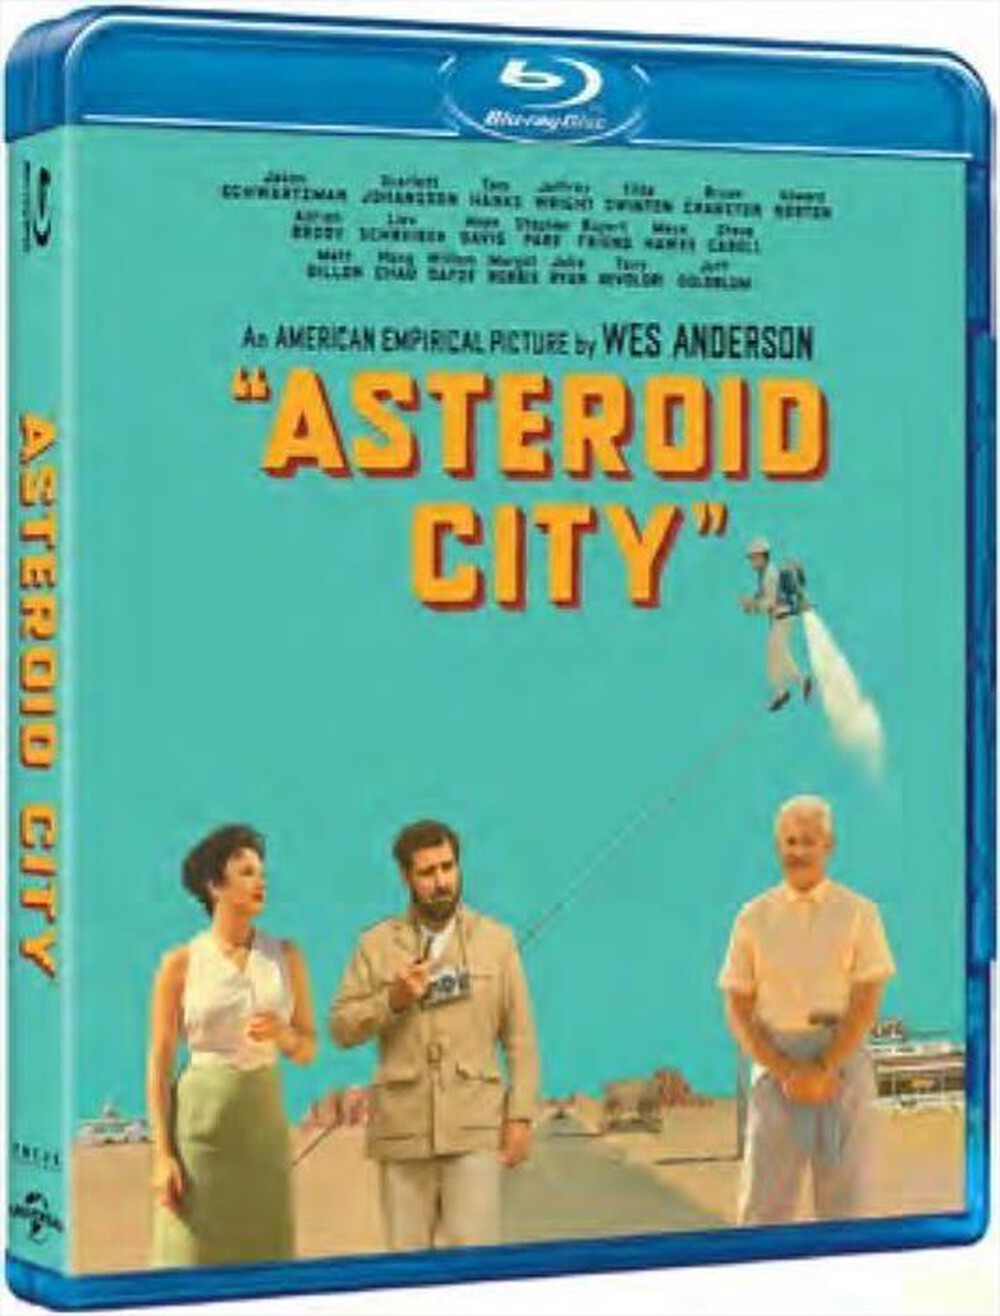 "UNIVERSAL PICTURES - Asteroid City"